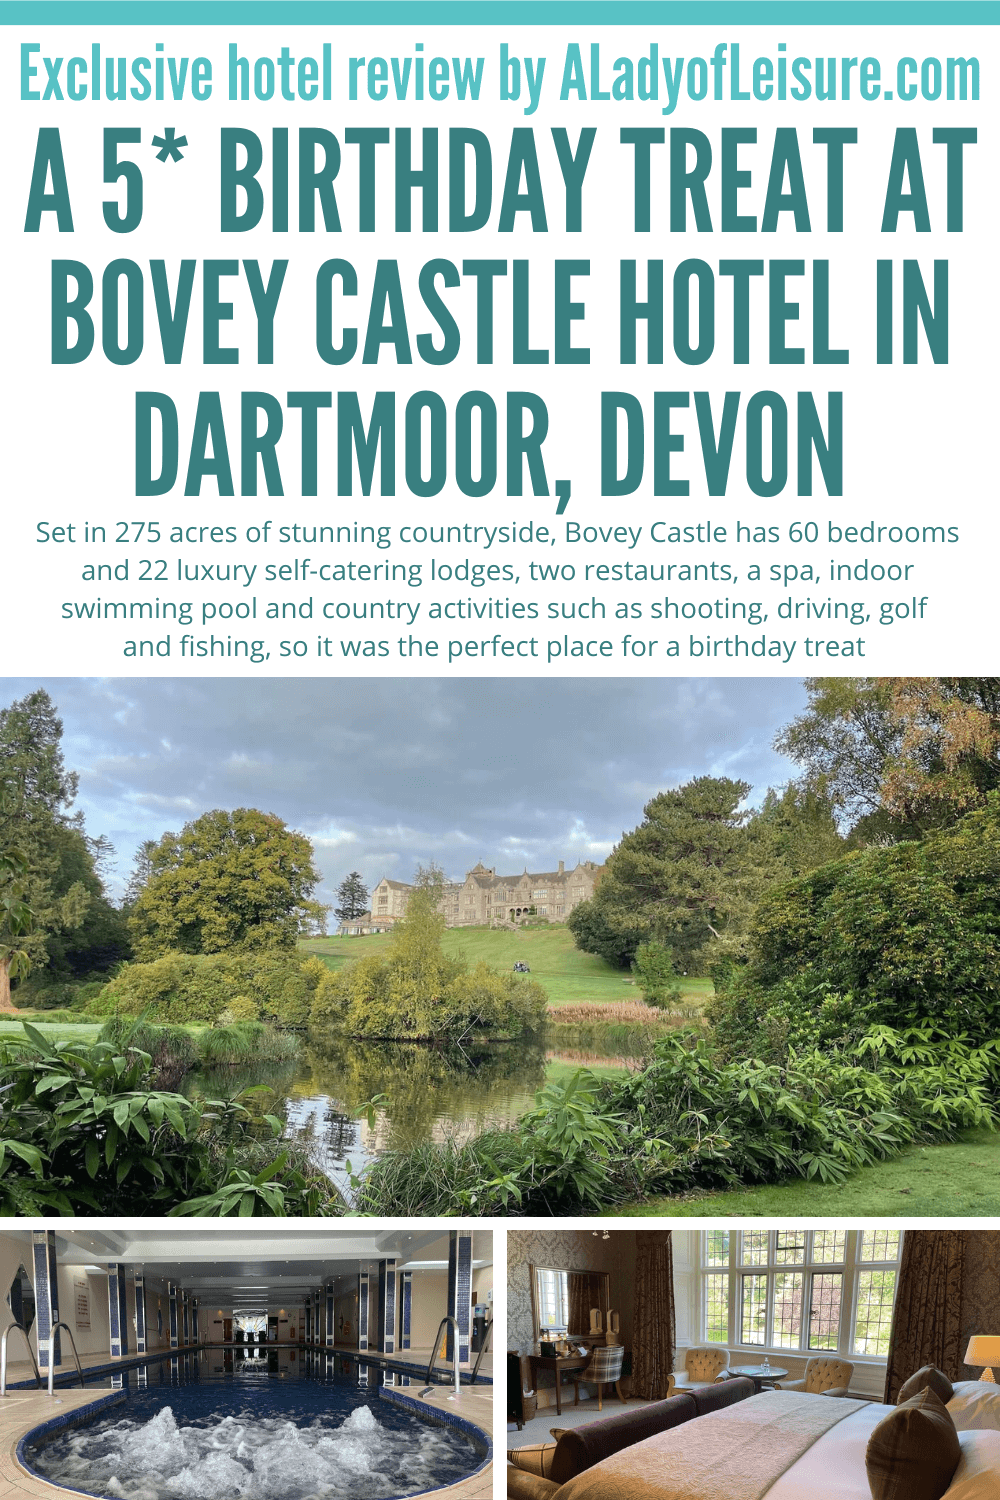 bovey castle hotel review